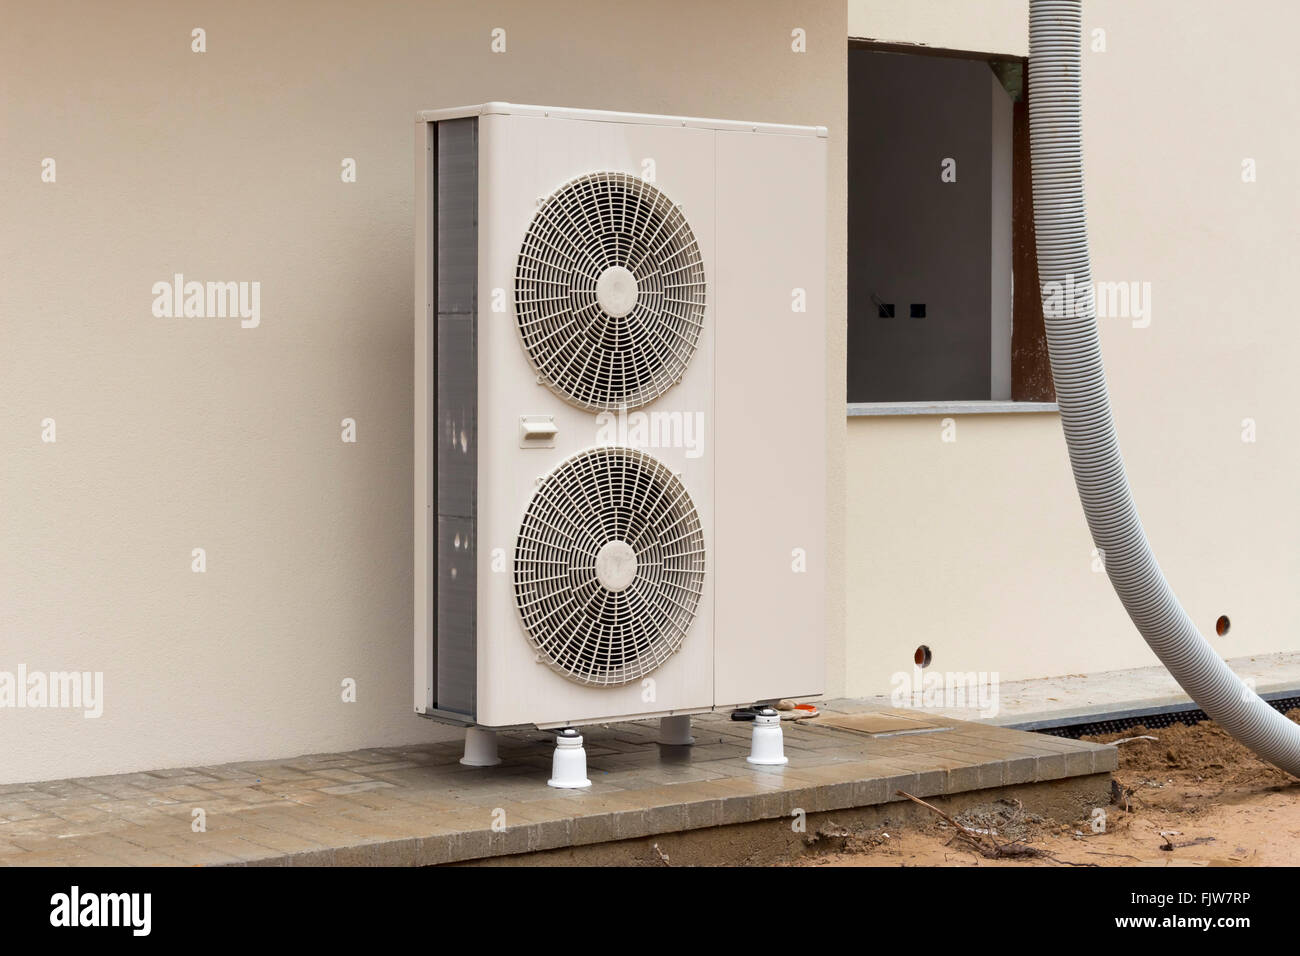 Inspiration Palads ukuelige Heat Pump High Resolution Stock Photography and Images - Alamy